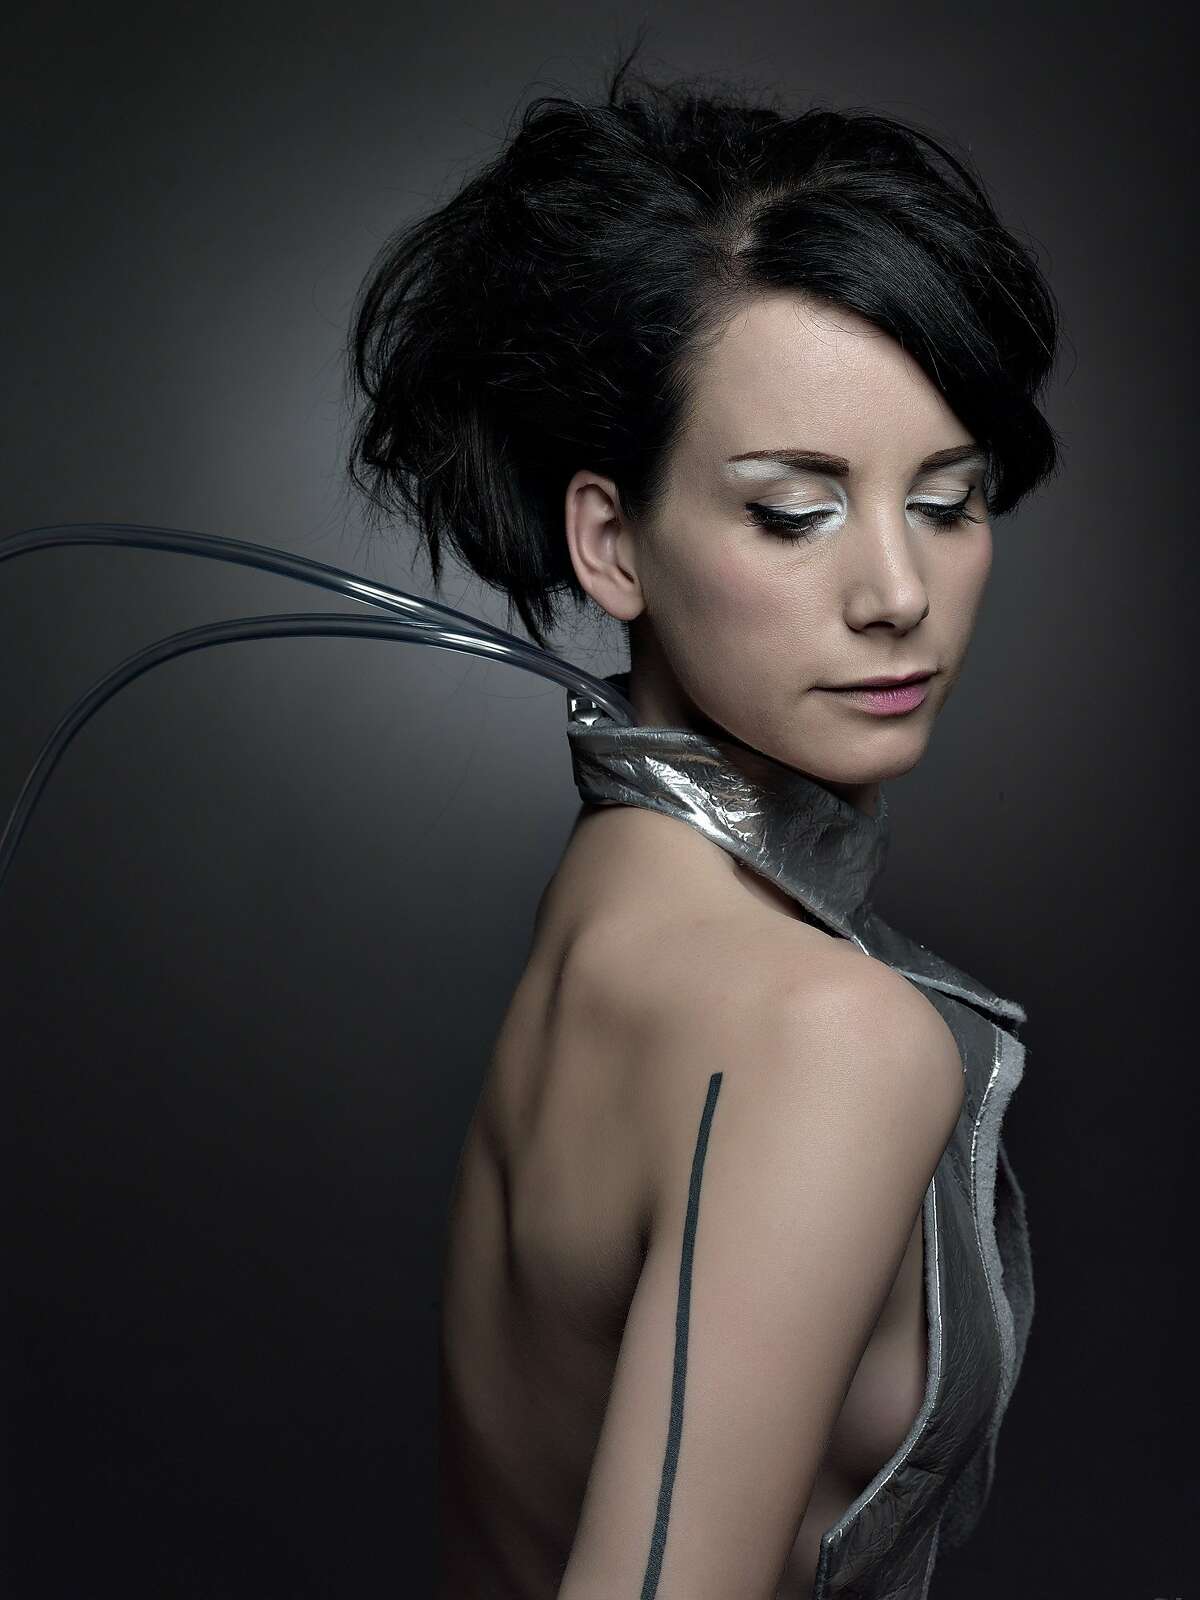 Dutch fashion designer Anouk Wipprecht, pictured here, is known for mixing technology into her apparel to make clothing that responds to the wearer's vital signs, such as blowing smoke when another person comes too close or making spider-like tentacles flare out to ward off someone intruding into the wearer's space. Her "Spider Dress" is on display at the Museum of Craft and Design through Sept. 13, 2015, in an exhibit of futuristic interior, architectural and fashion design by Dutch designers.